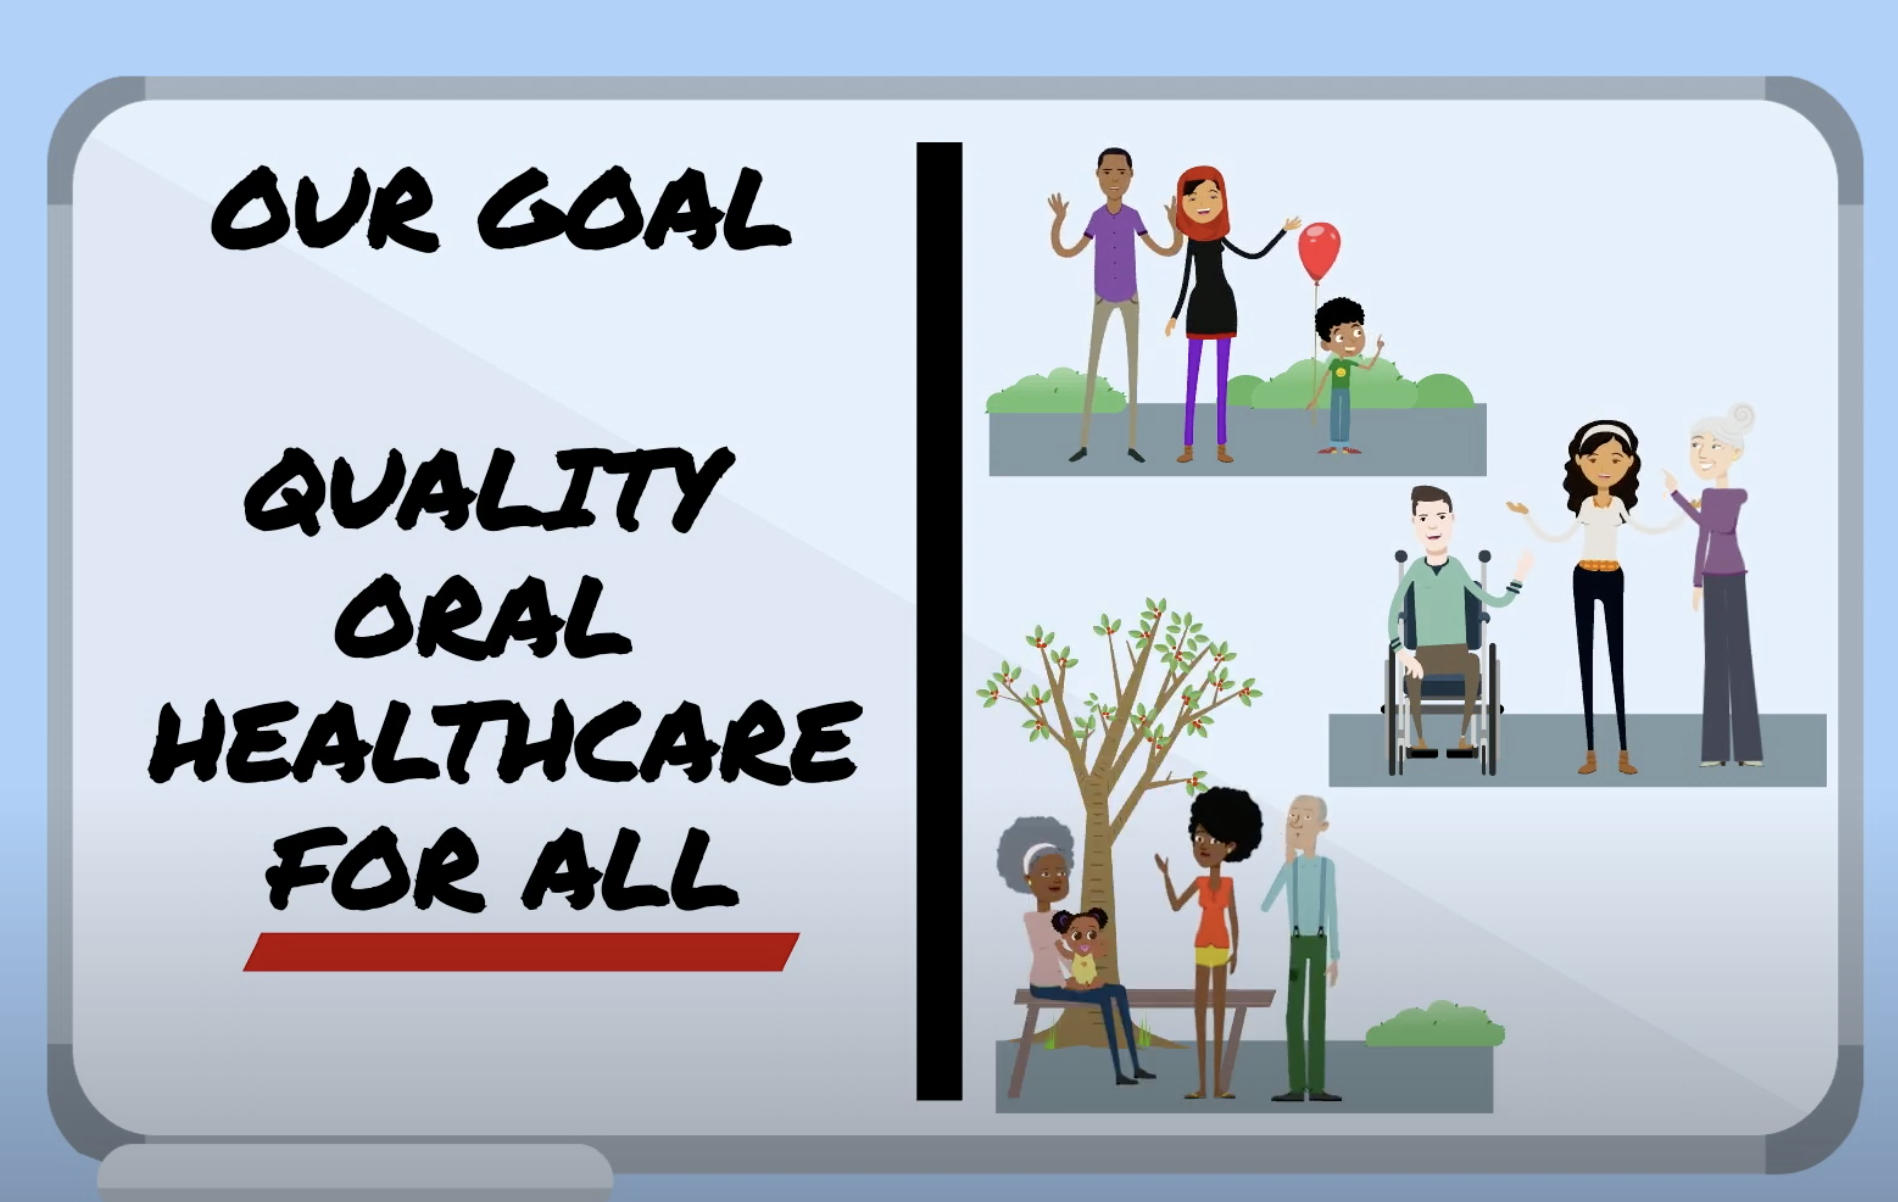 Our Goal: Quality Oral Health Care for All written on a whiteboard with drawings of 3 communities representing different racial and ethnic backgrounds, ages, and abilities.